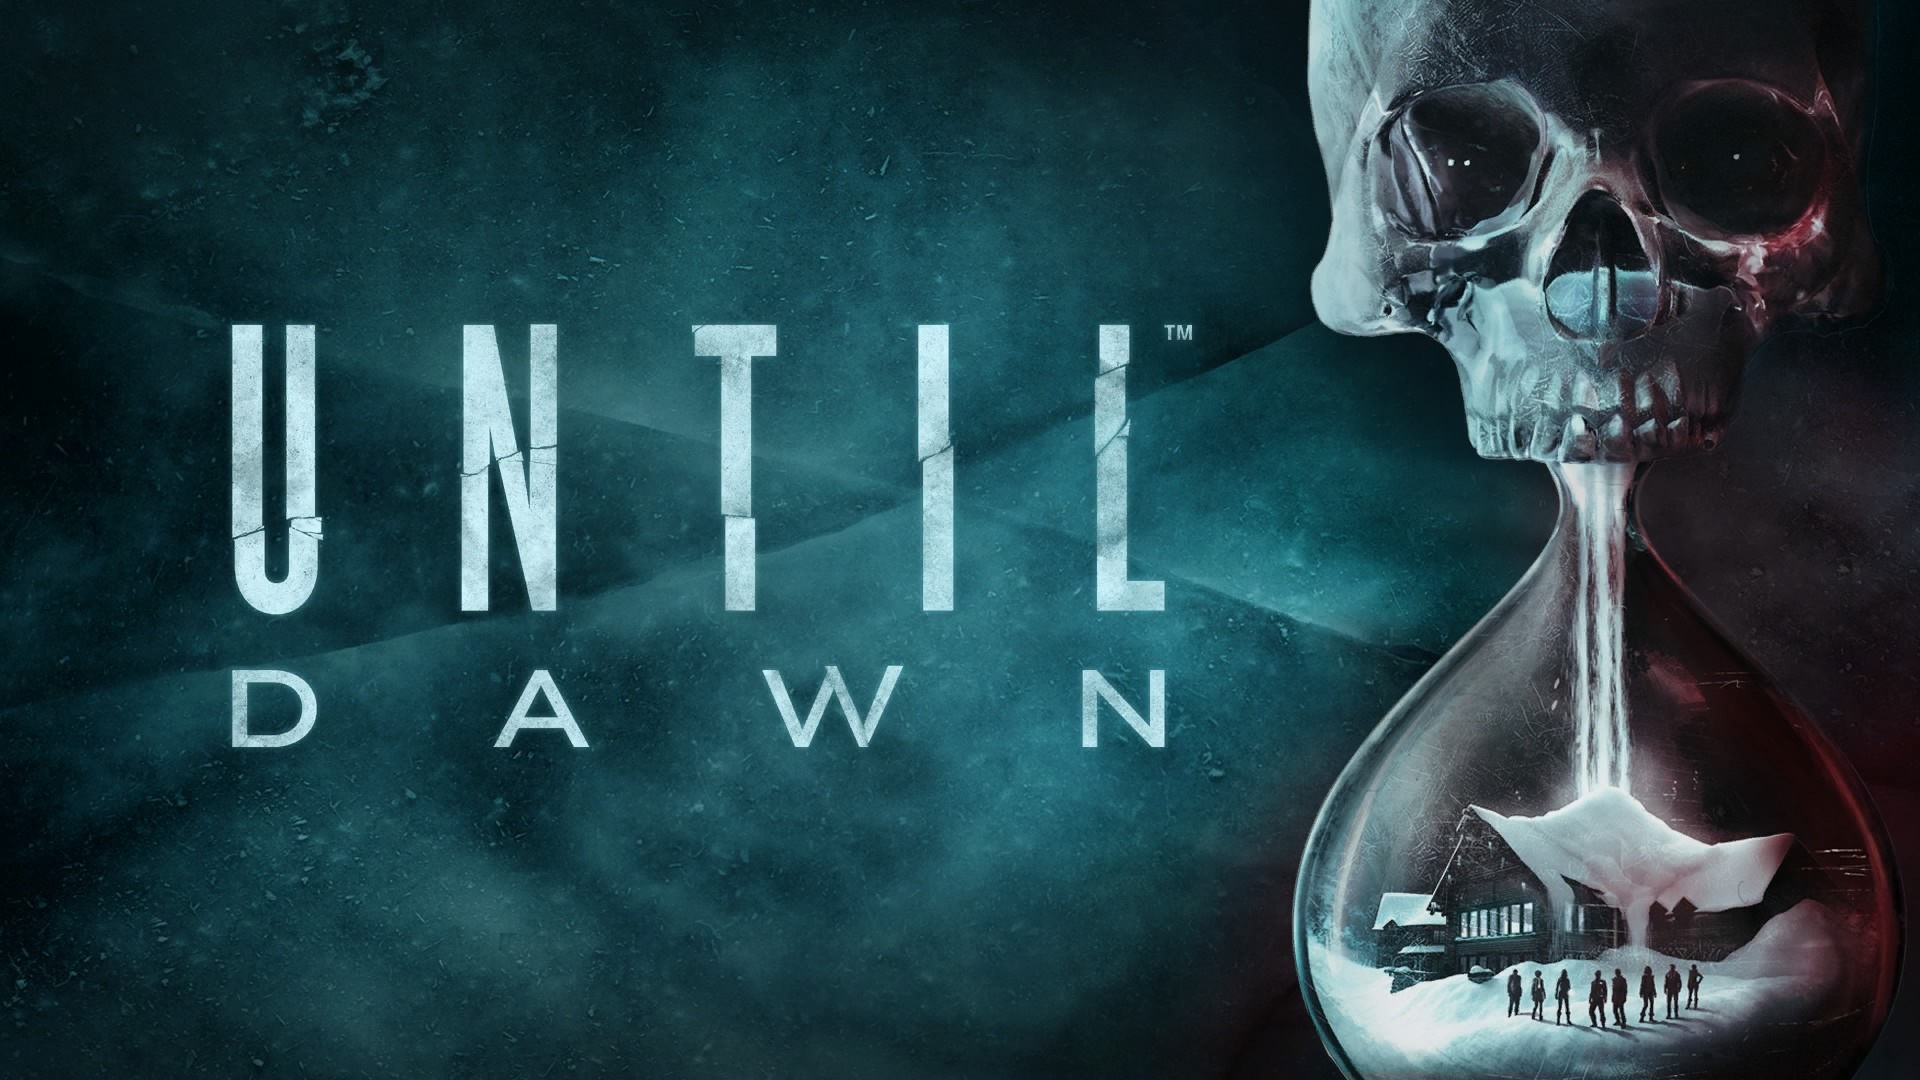 News on the film Until Dawn - news, Movies, Film and TV series news, Until Dawn, USA, Playstation, Poster, The photo, Casting, Horror, Games, Video game, Sony, Remake, Franchise, Screen adaptation, Actors and actresses, Plot, Survival, Project